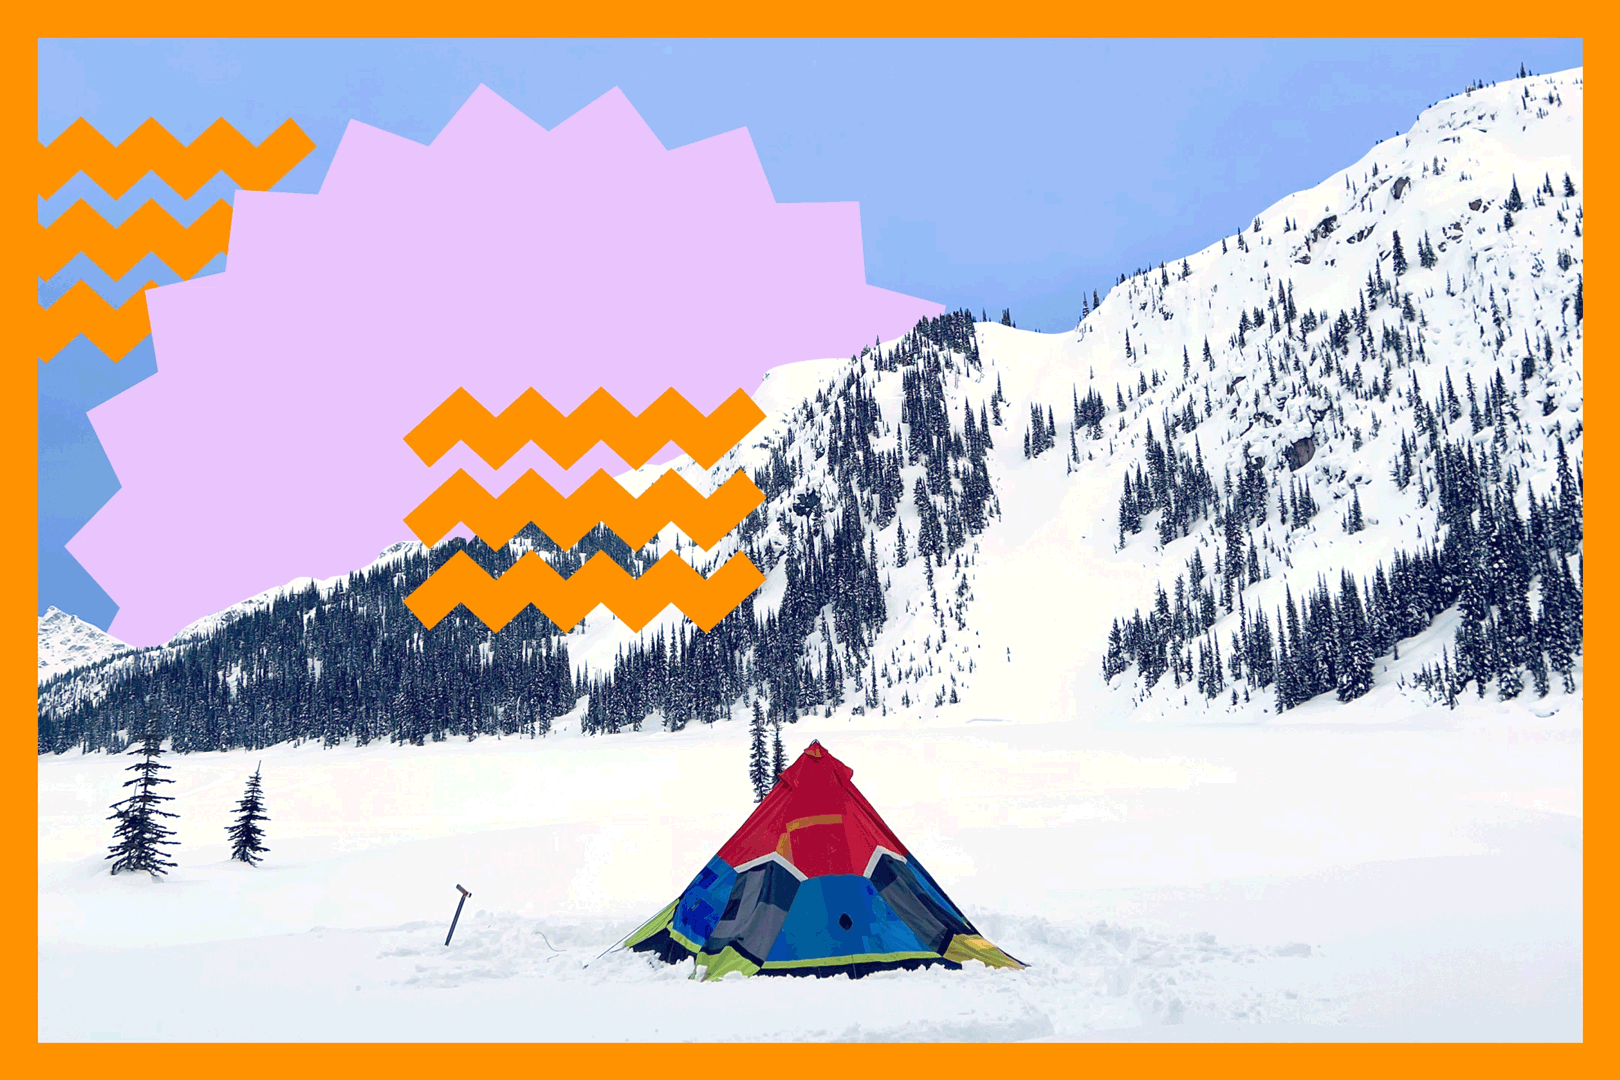 A tent at the foot of a snowy mountain.